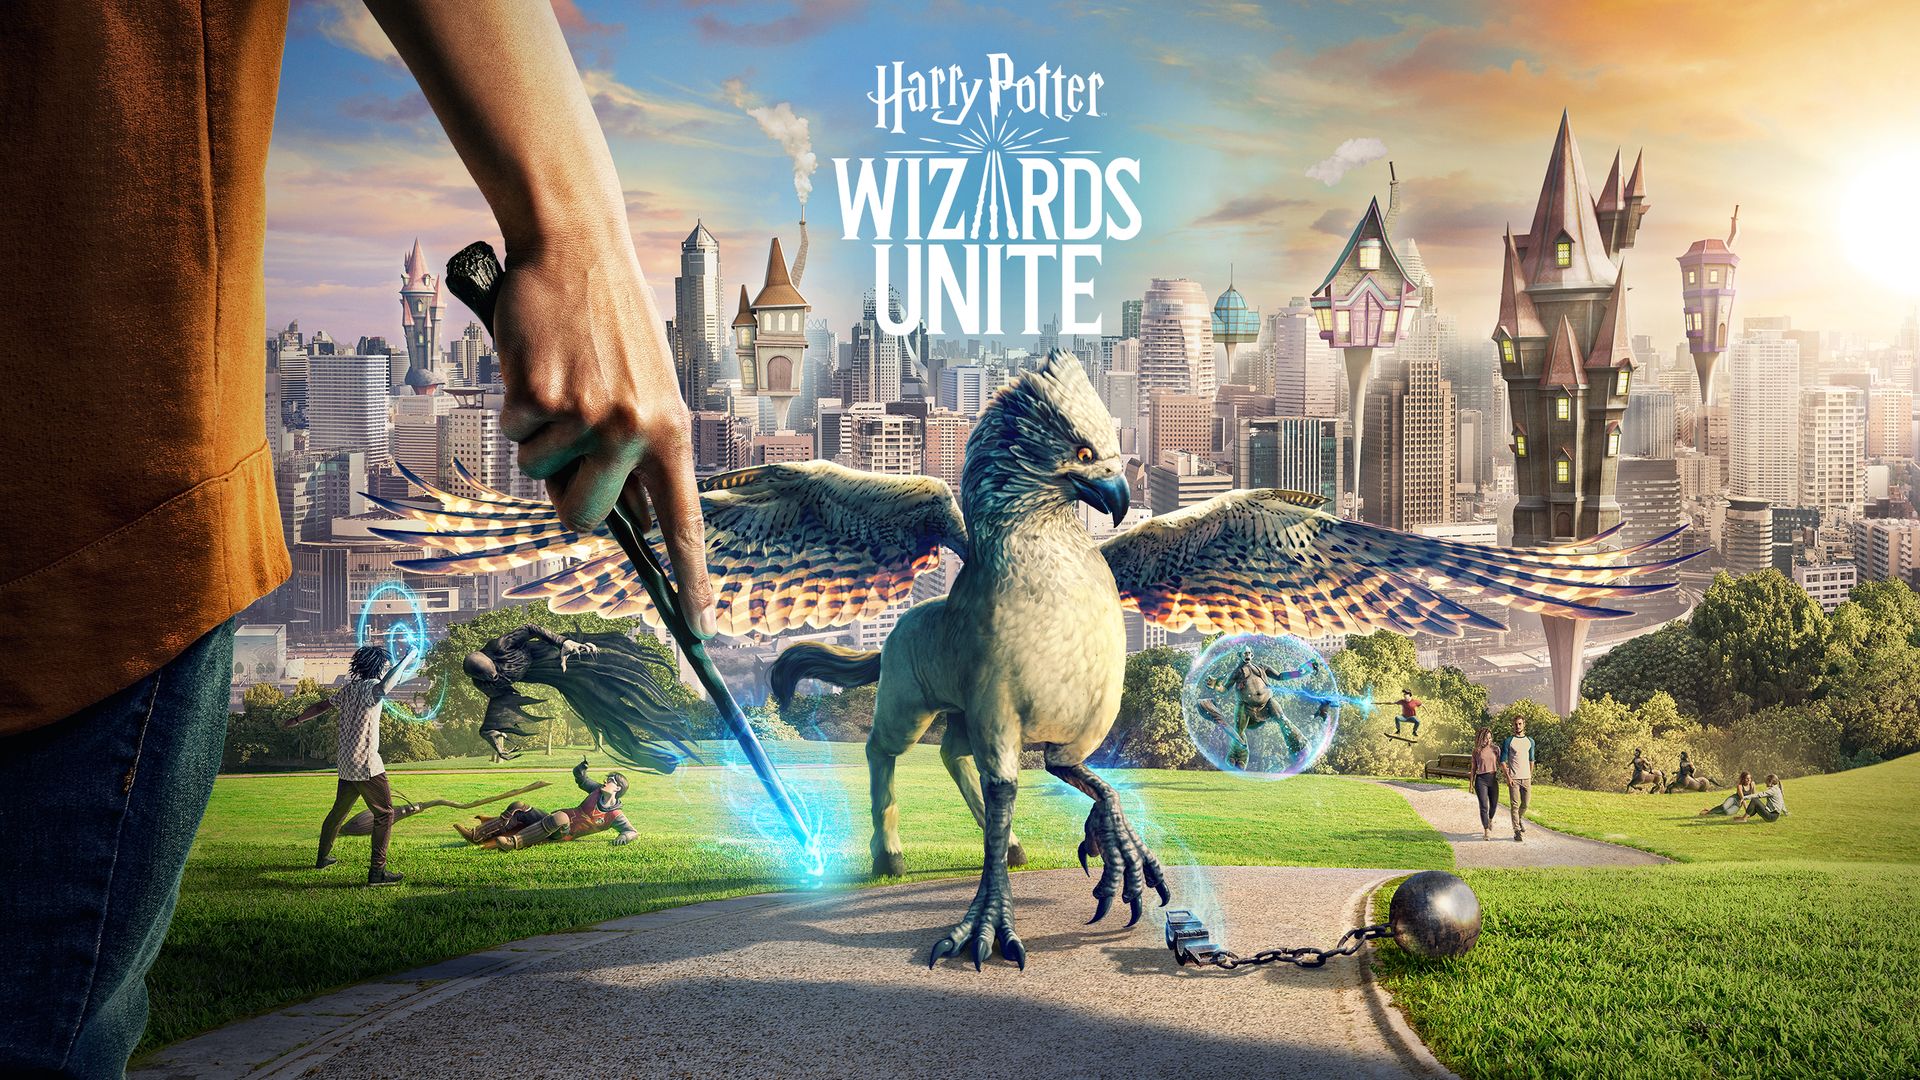 A promotional image for Harry Potter: Wizards Unite showing some characters and images from the game